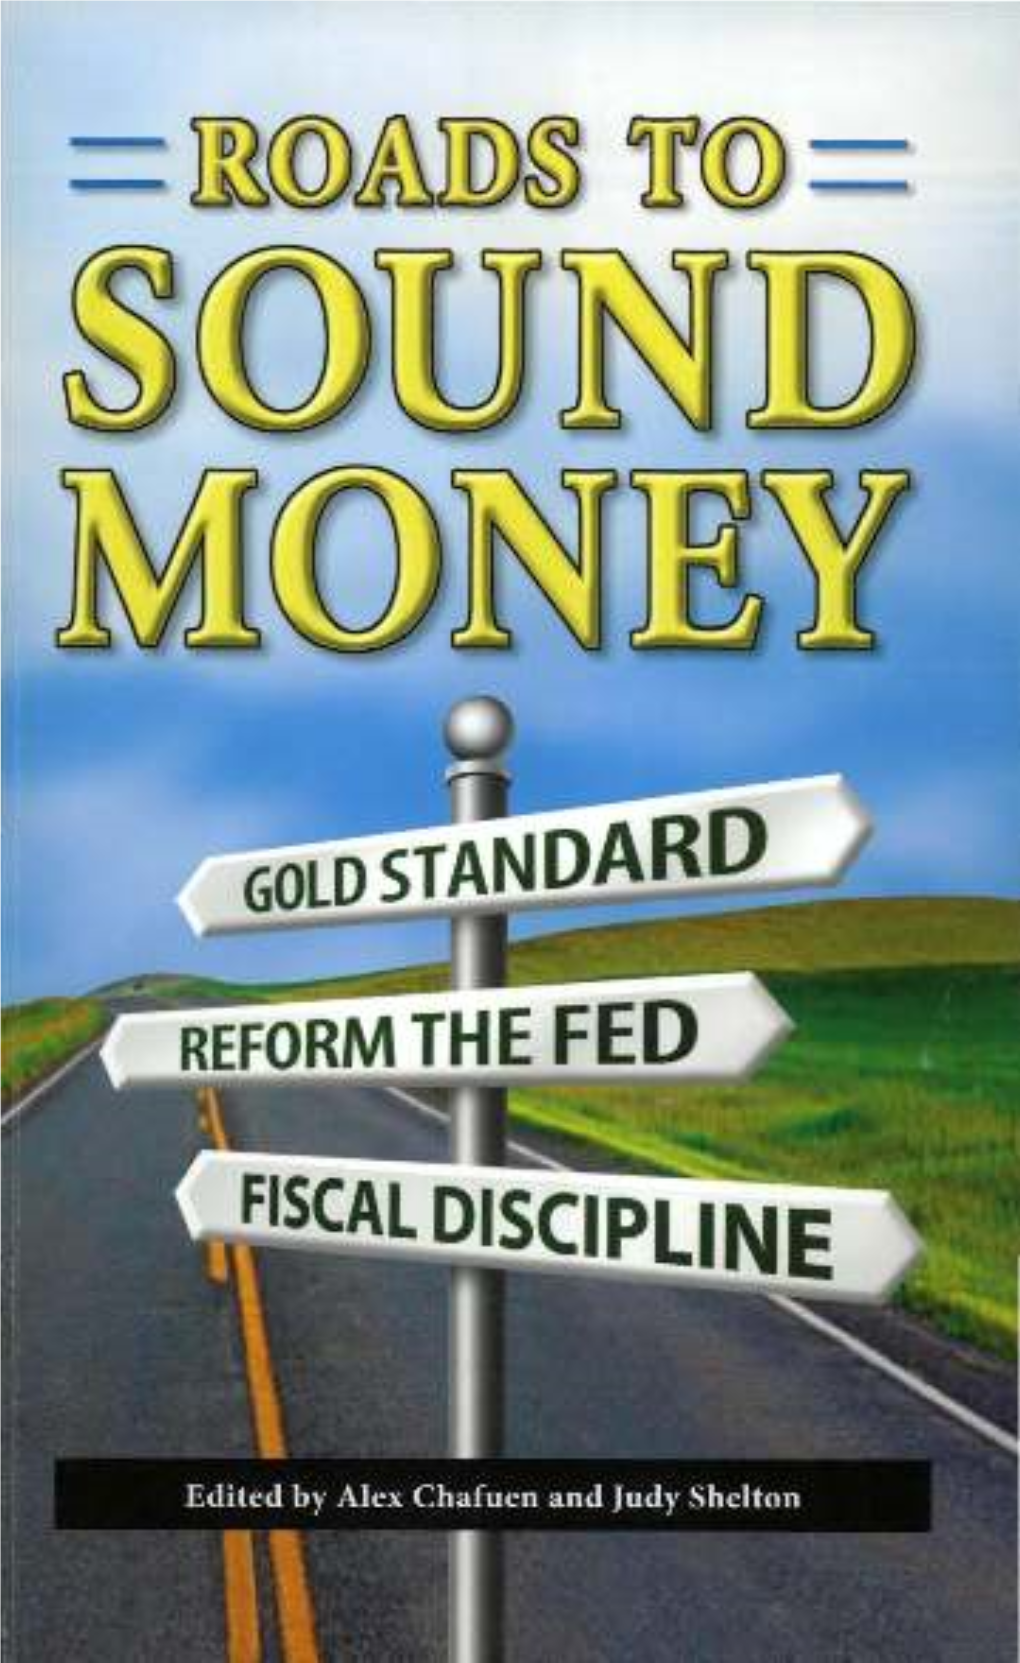 Roads to Sound Money Edited by Alex Chafuen and Judy Shelton